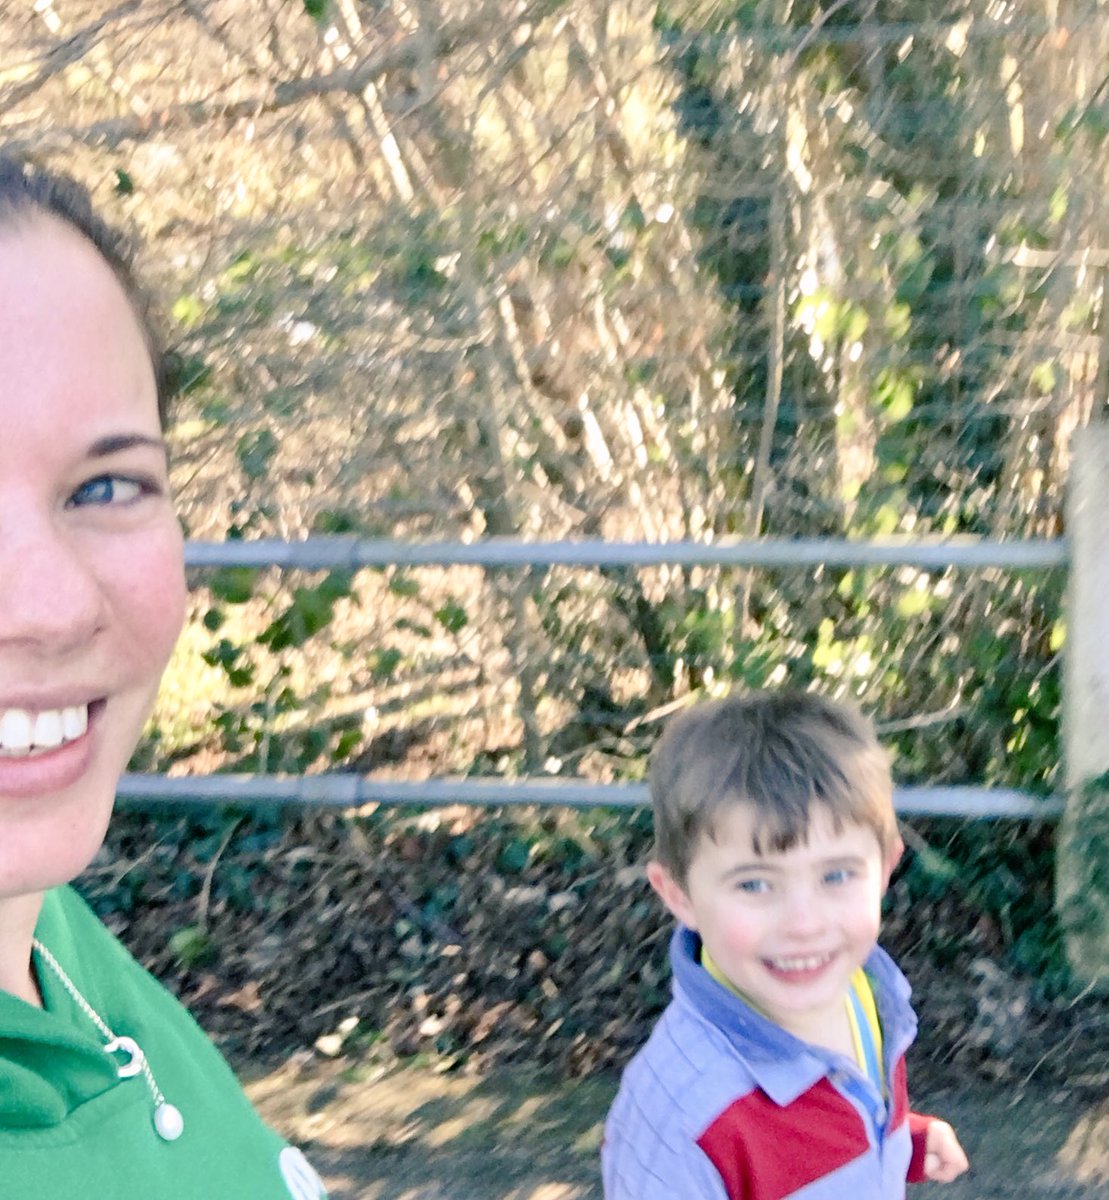 A run in the sun with my son #sharingmypassion #runchat #running #kidsrunning